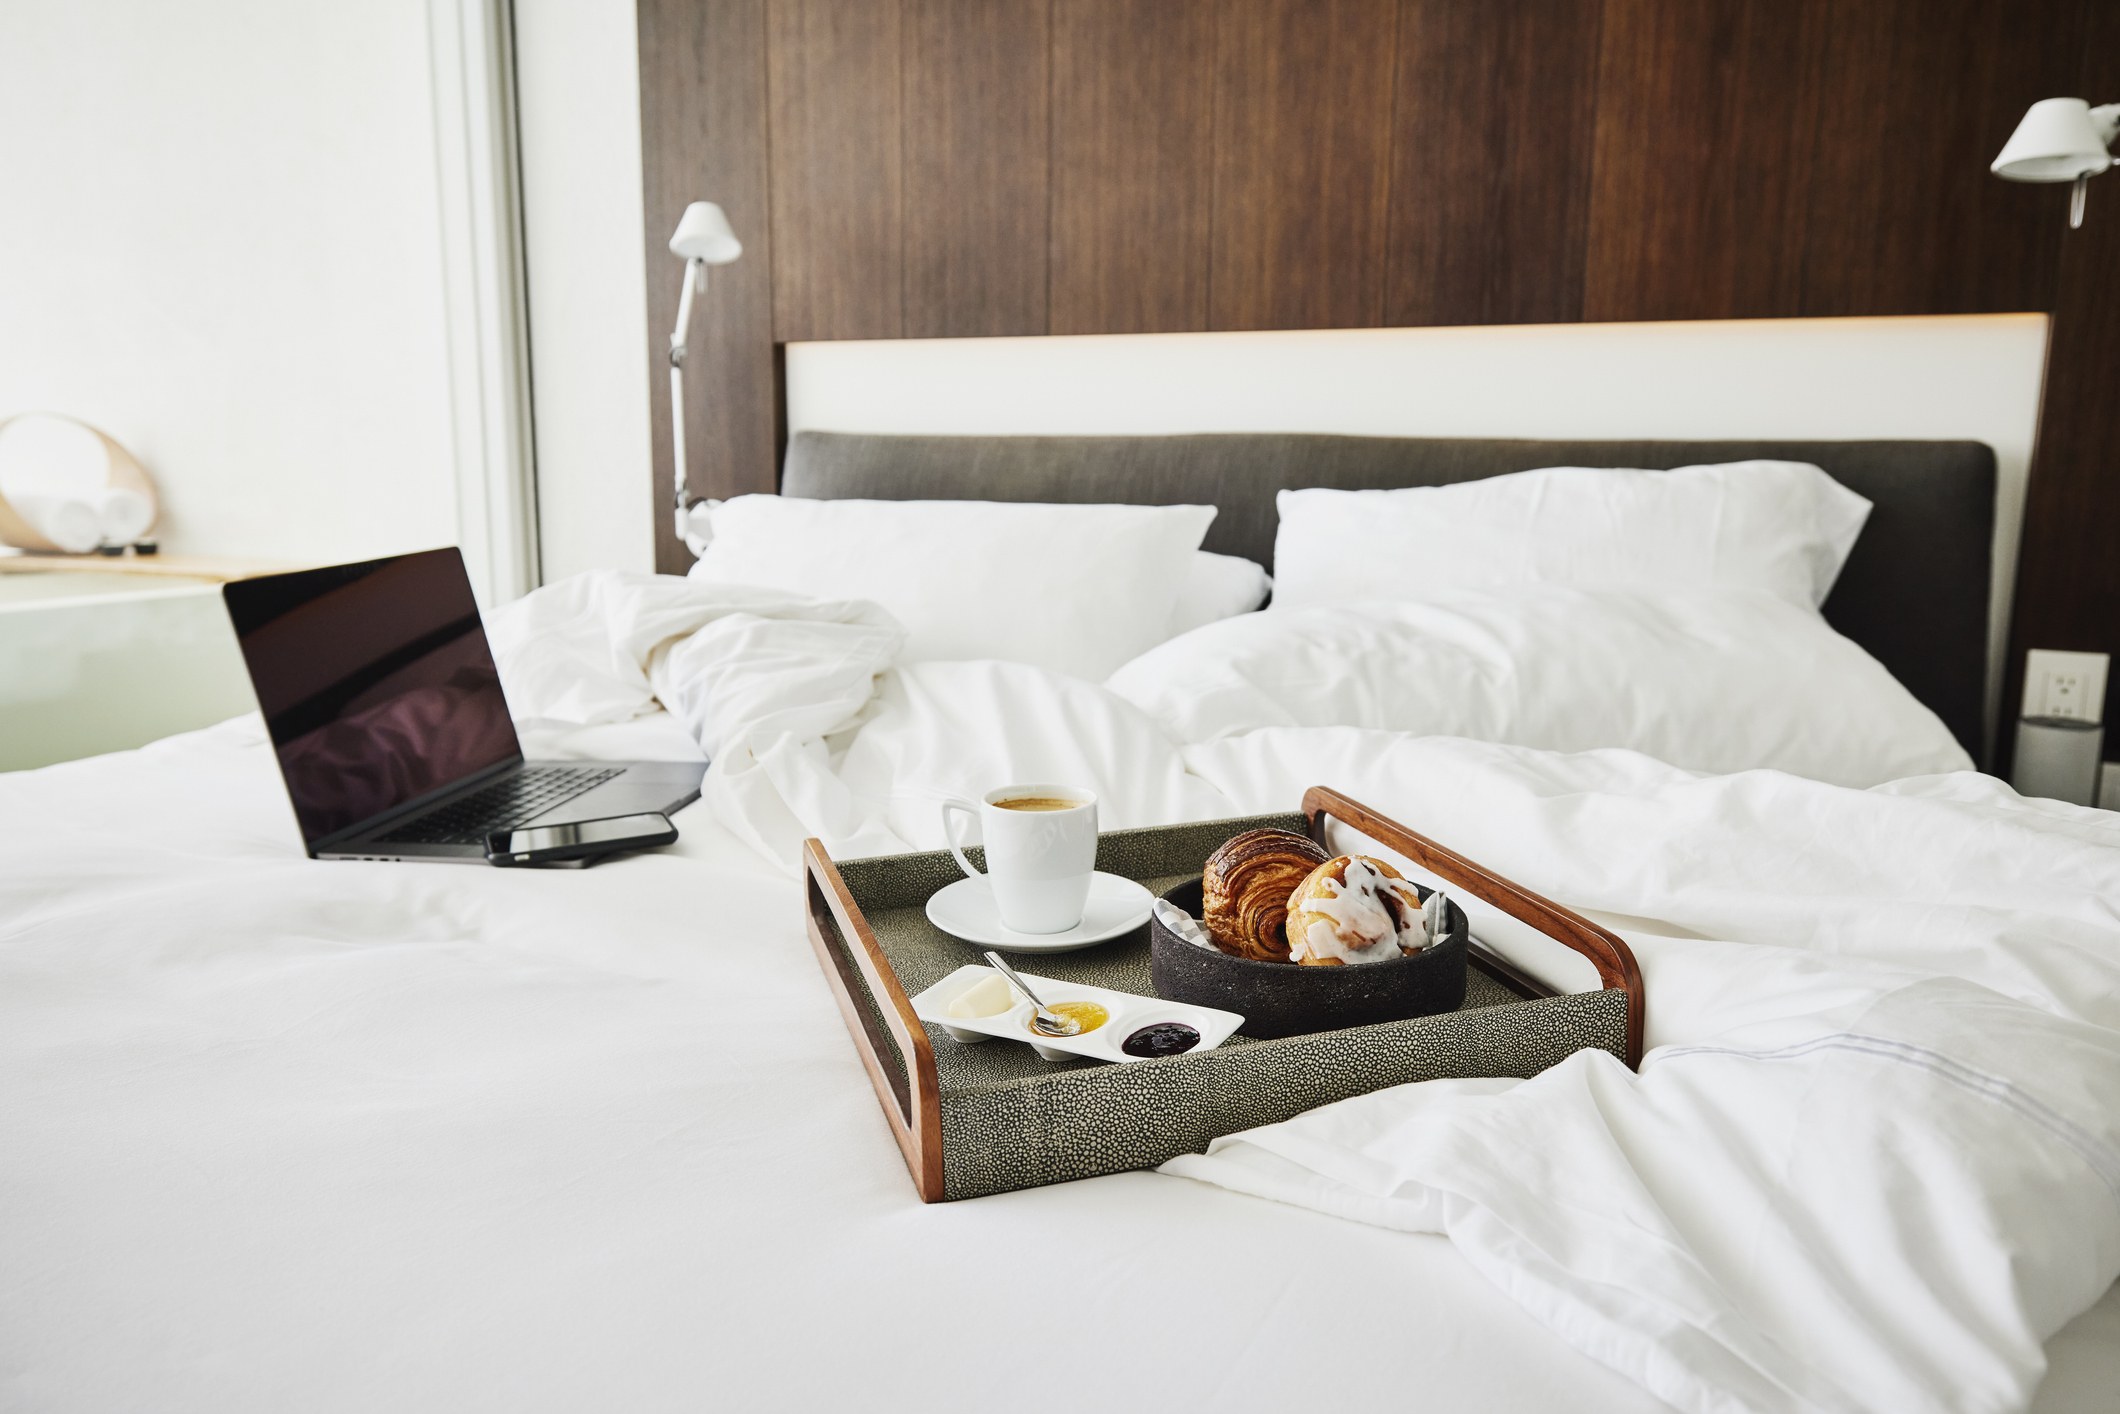 Breakfast on tray with laptop on bed in a modern room, suggesting working during a leisurely morning